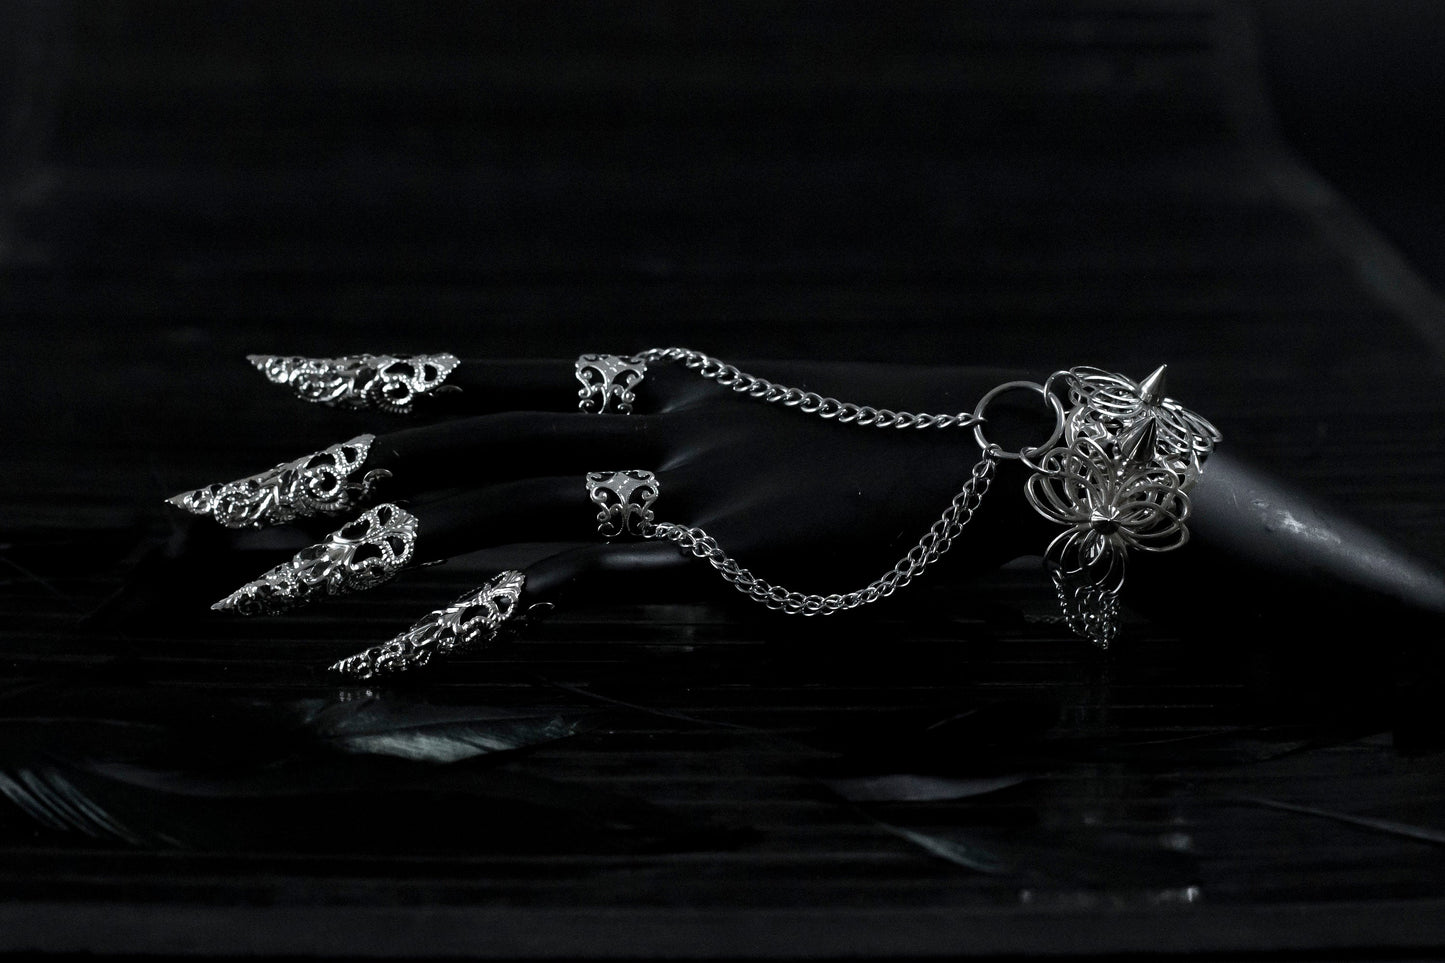 This striking Myril Jewels punk jewelry set, featuring a hand chain bracelet with ring, and nail claw rings, exemplifies the cutting-edge style of dark avant-garde fashion. Crafted with precision, the set's silver studs and intricate filigree cater to enthusiasts of Neo Gothic and Gothic-chic trends, making it an ideal choice for Halloween, everyday wear, and special occasions like rave parties and festivals. Each piece is designed to make a bold statement